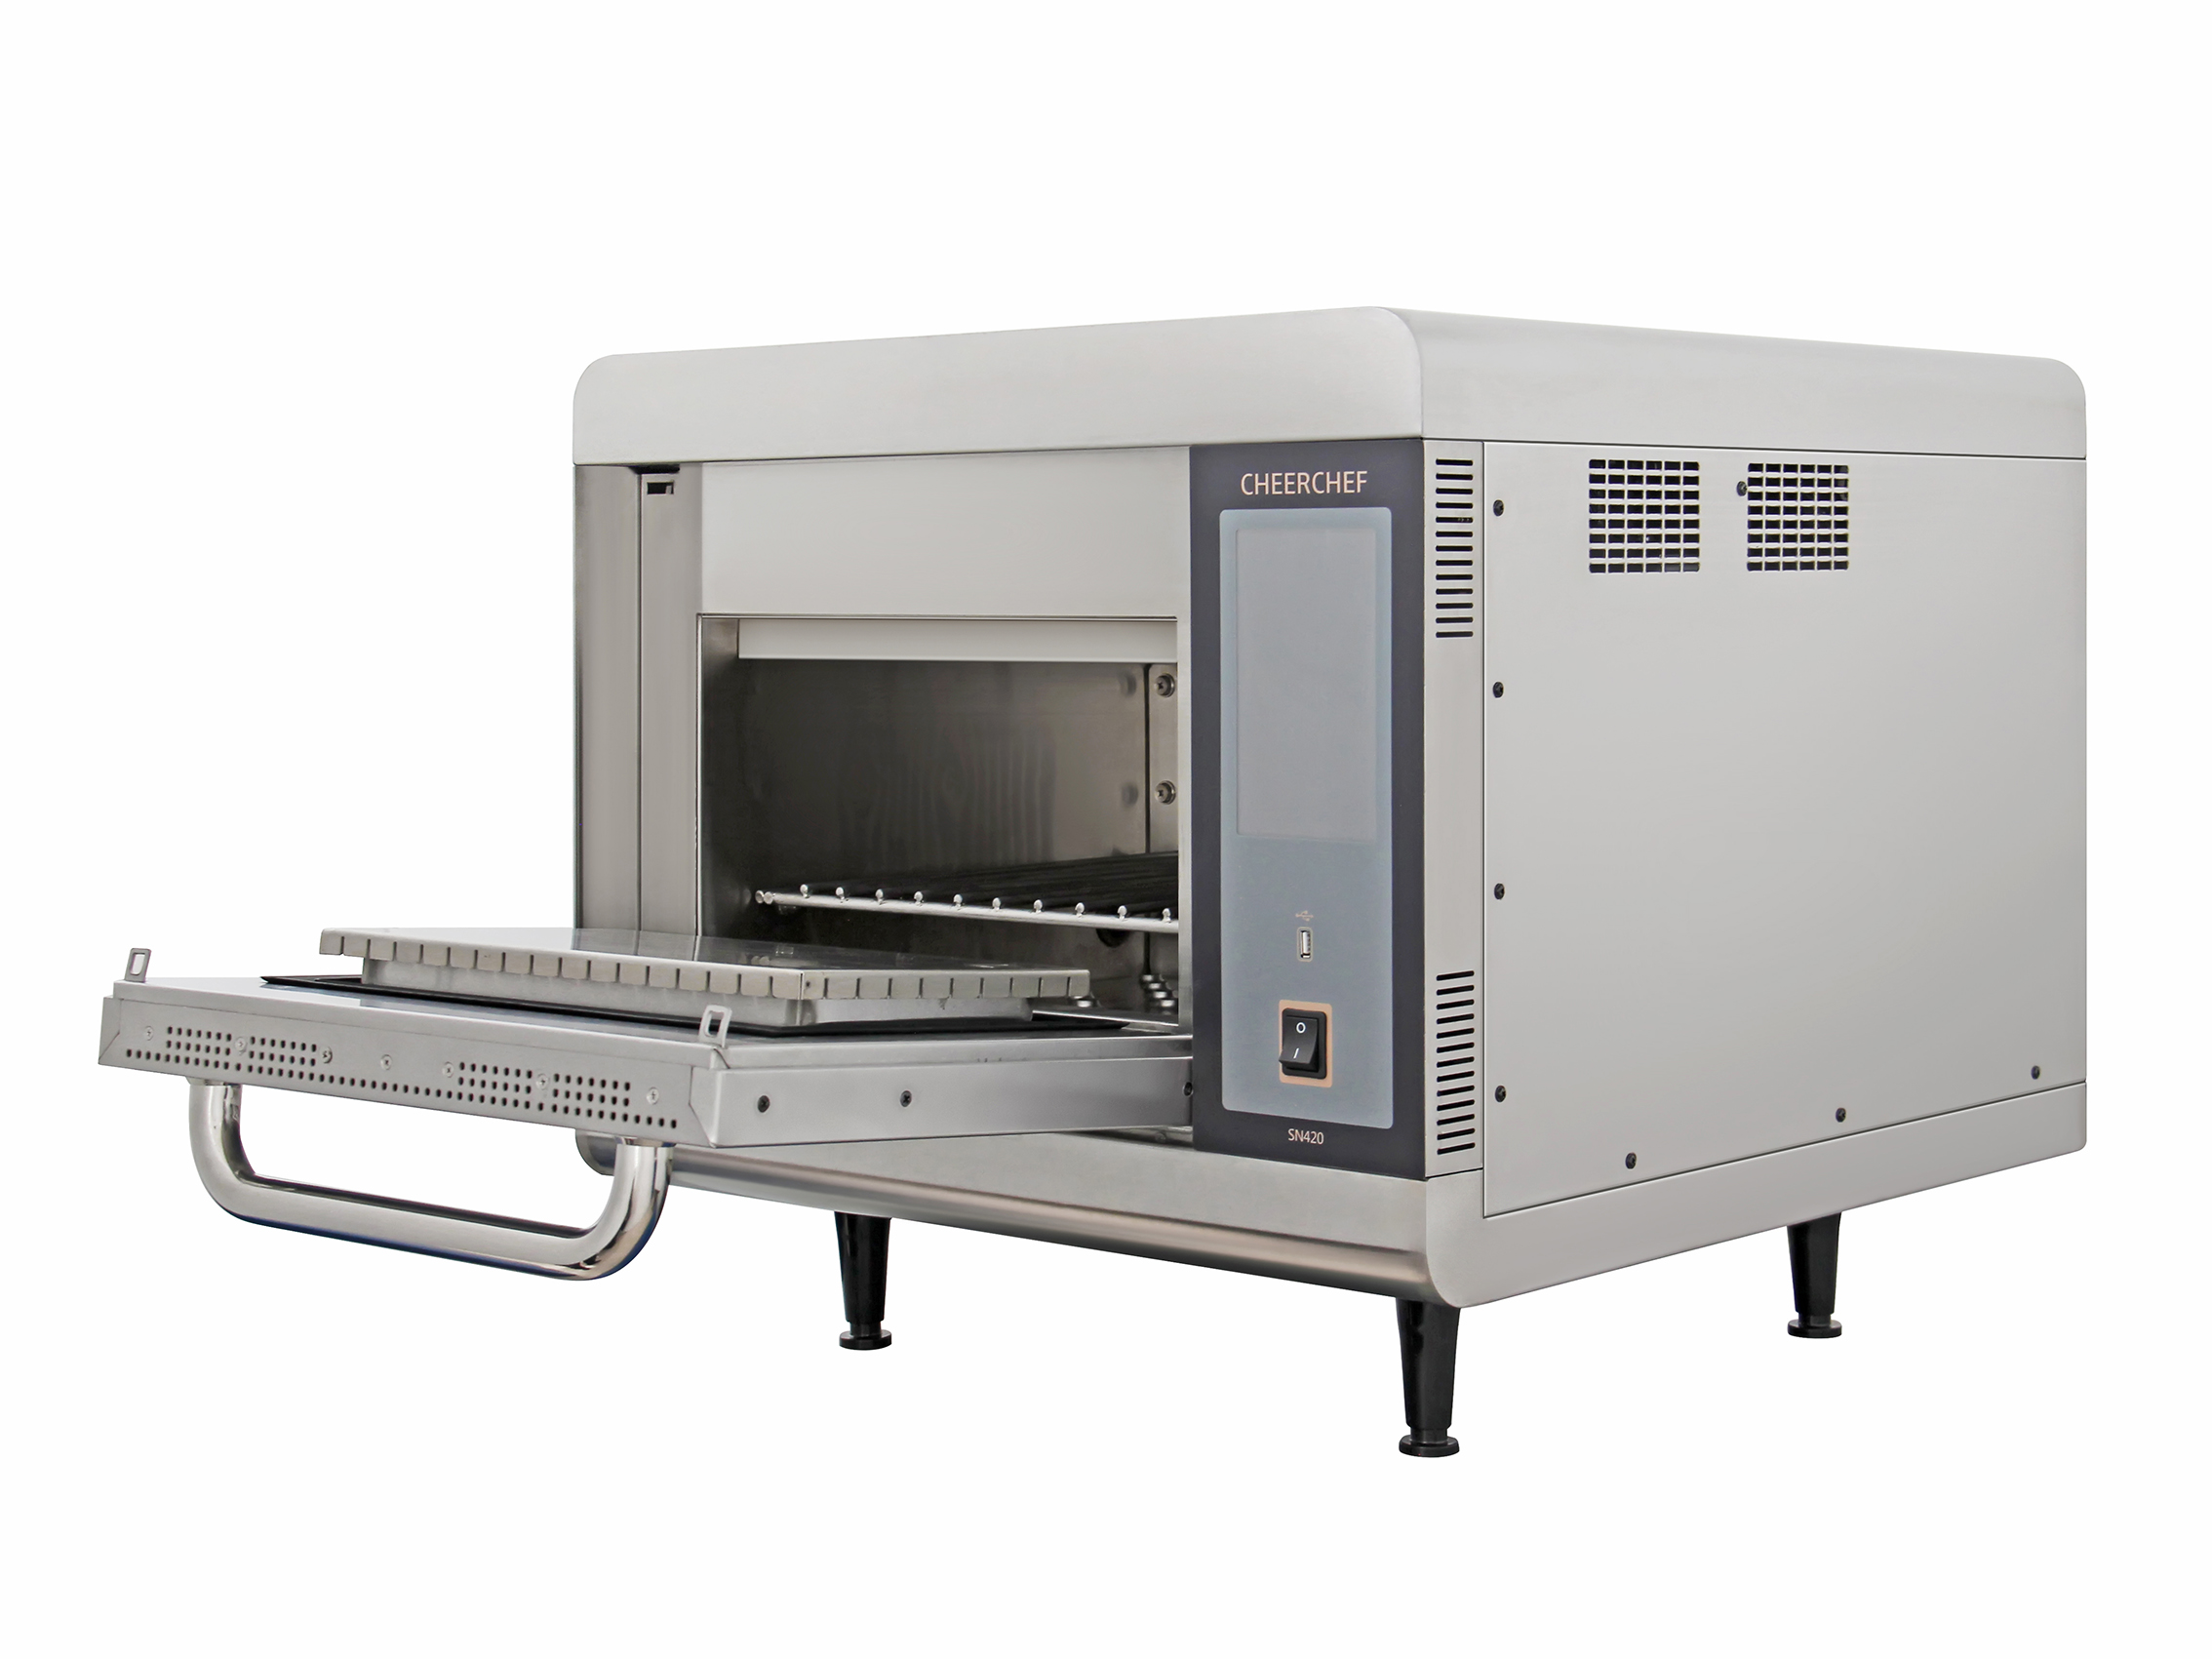 SN420-30A Model High-speed Accelerated Countertop Ventless Cooking Oven